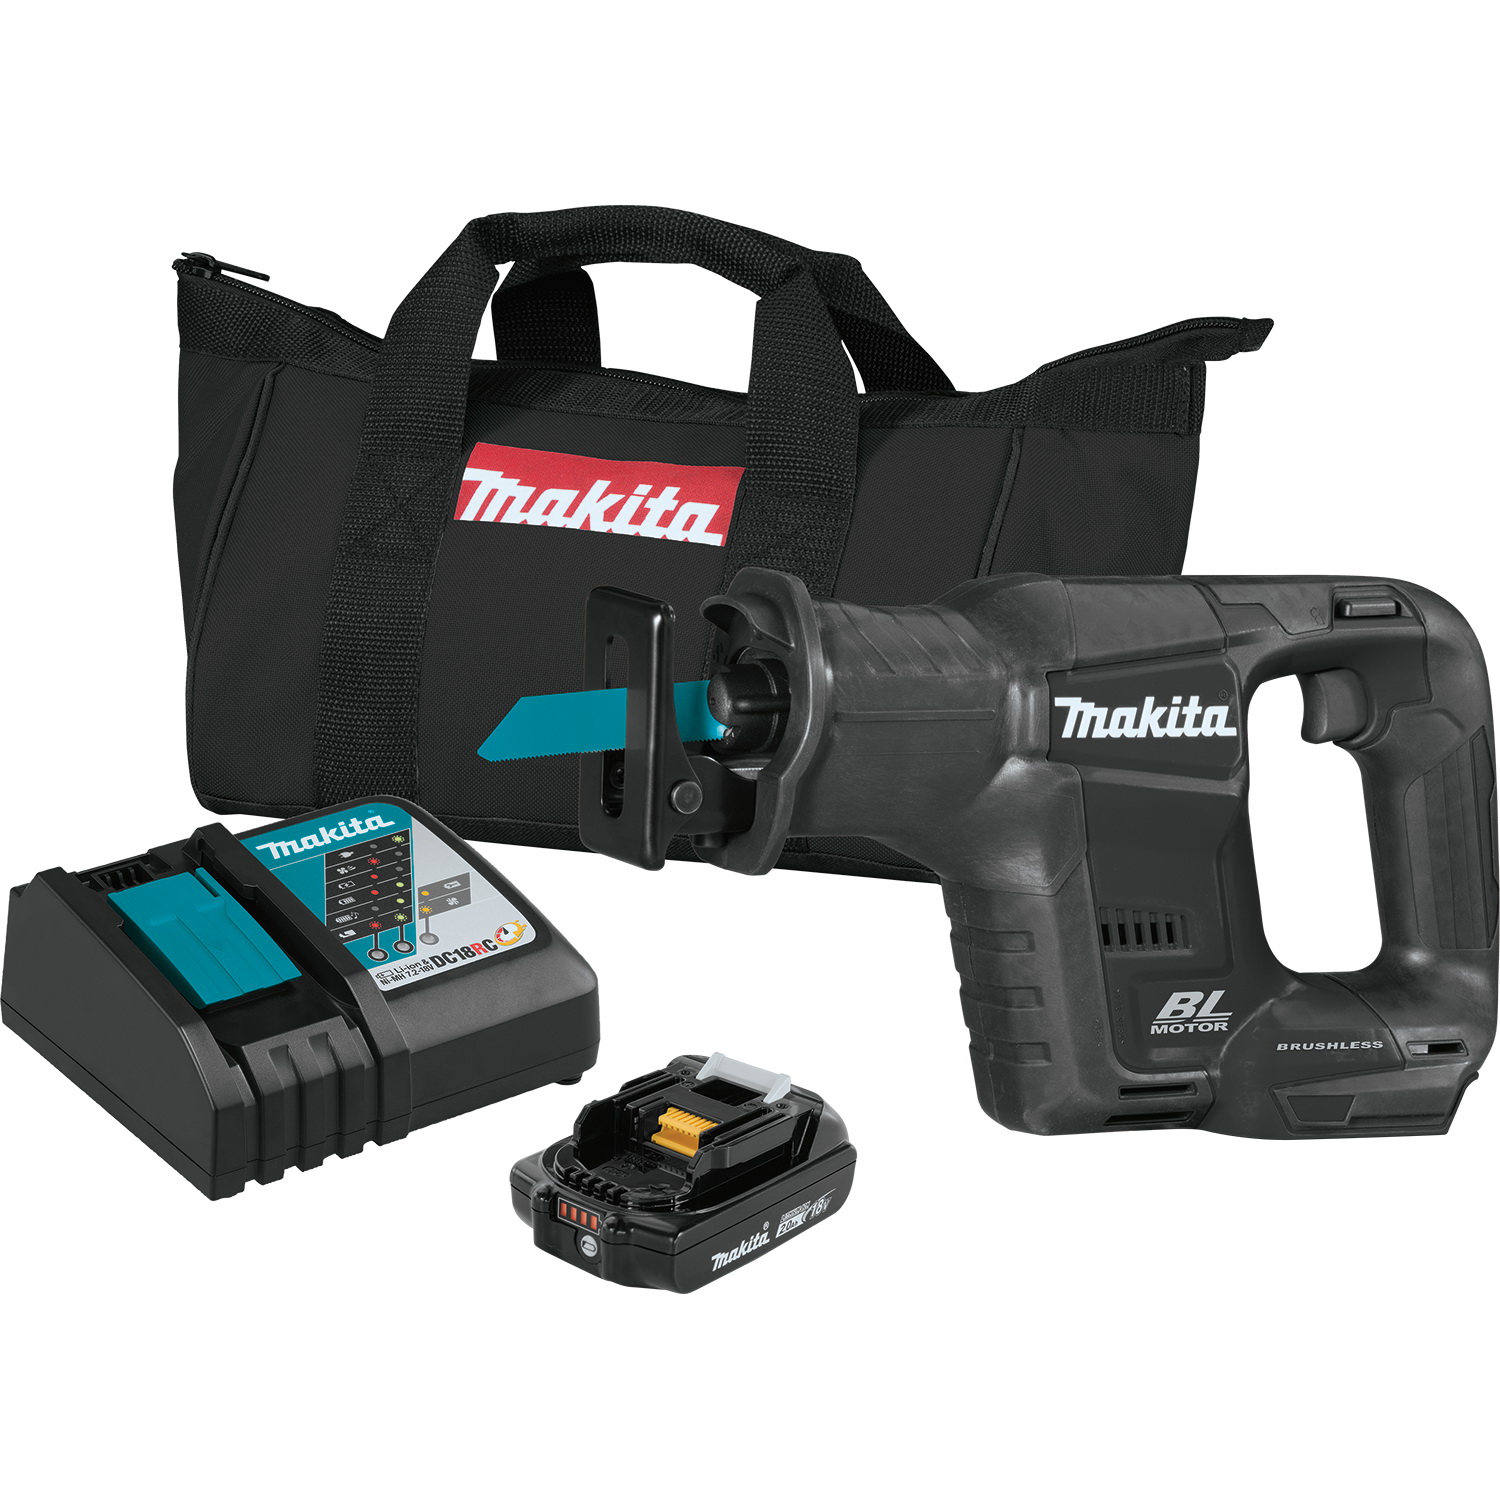 Makita XRJ07R1B Reciprocating Saw Kit, Battery Included, 18 V, 2 Ah, 5-1/8 in Pipe, 10 in Wood Cutting Capacity - 6